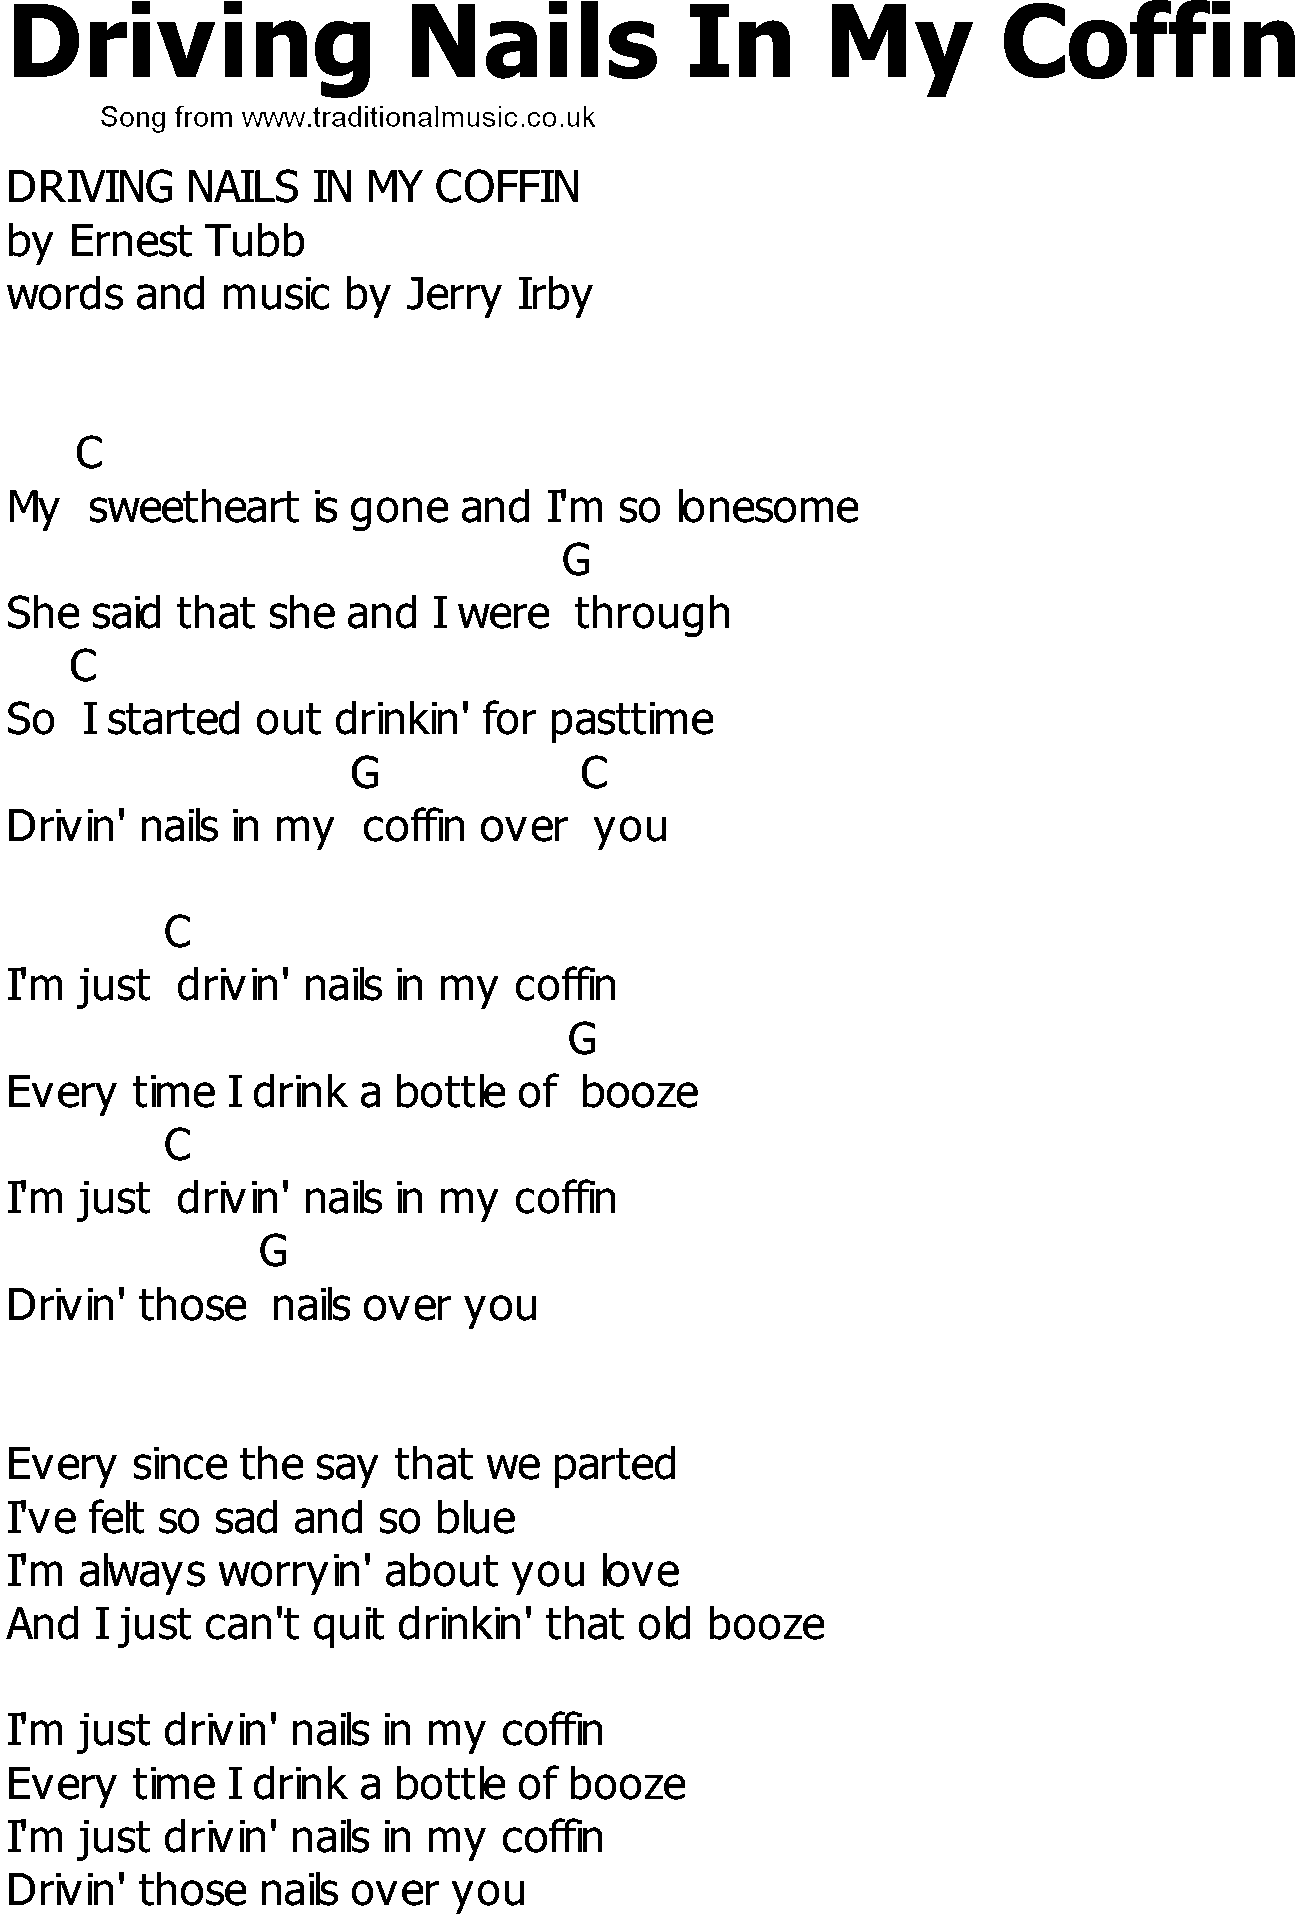 Old Country song lyrics with chords - Driving Nails In My Coffin